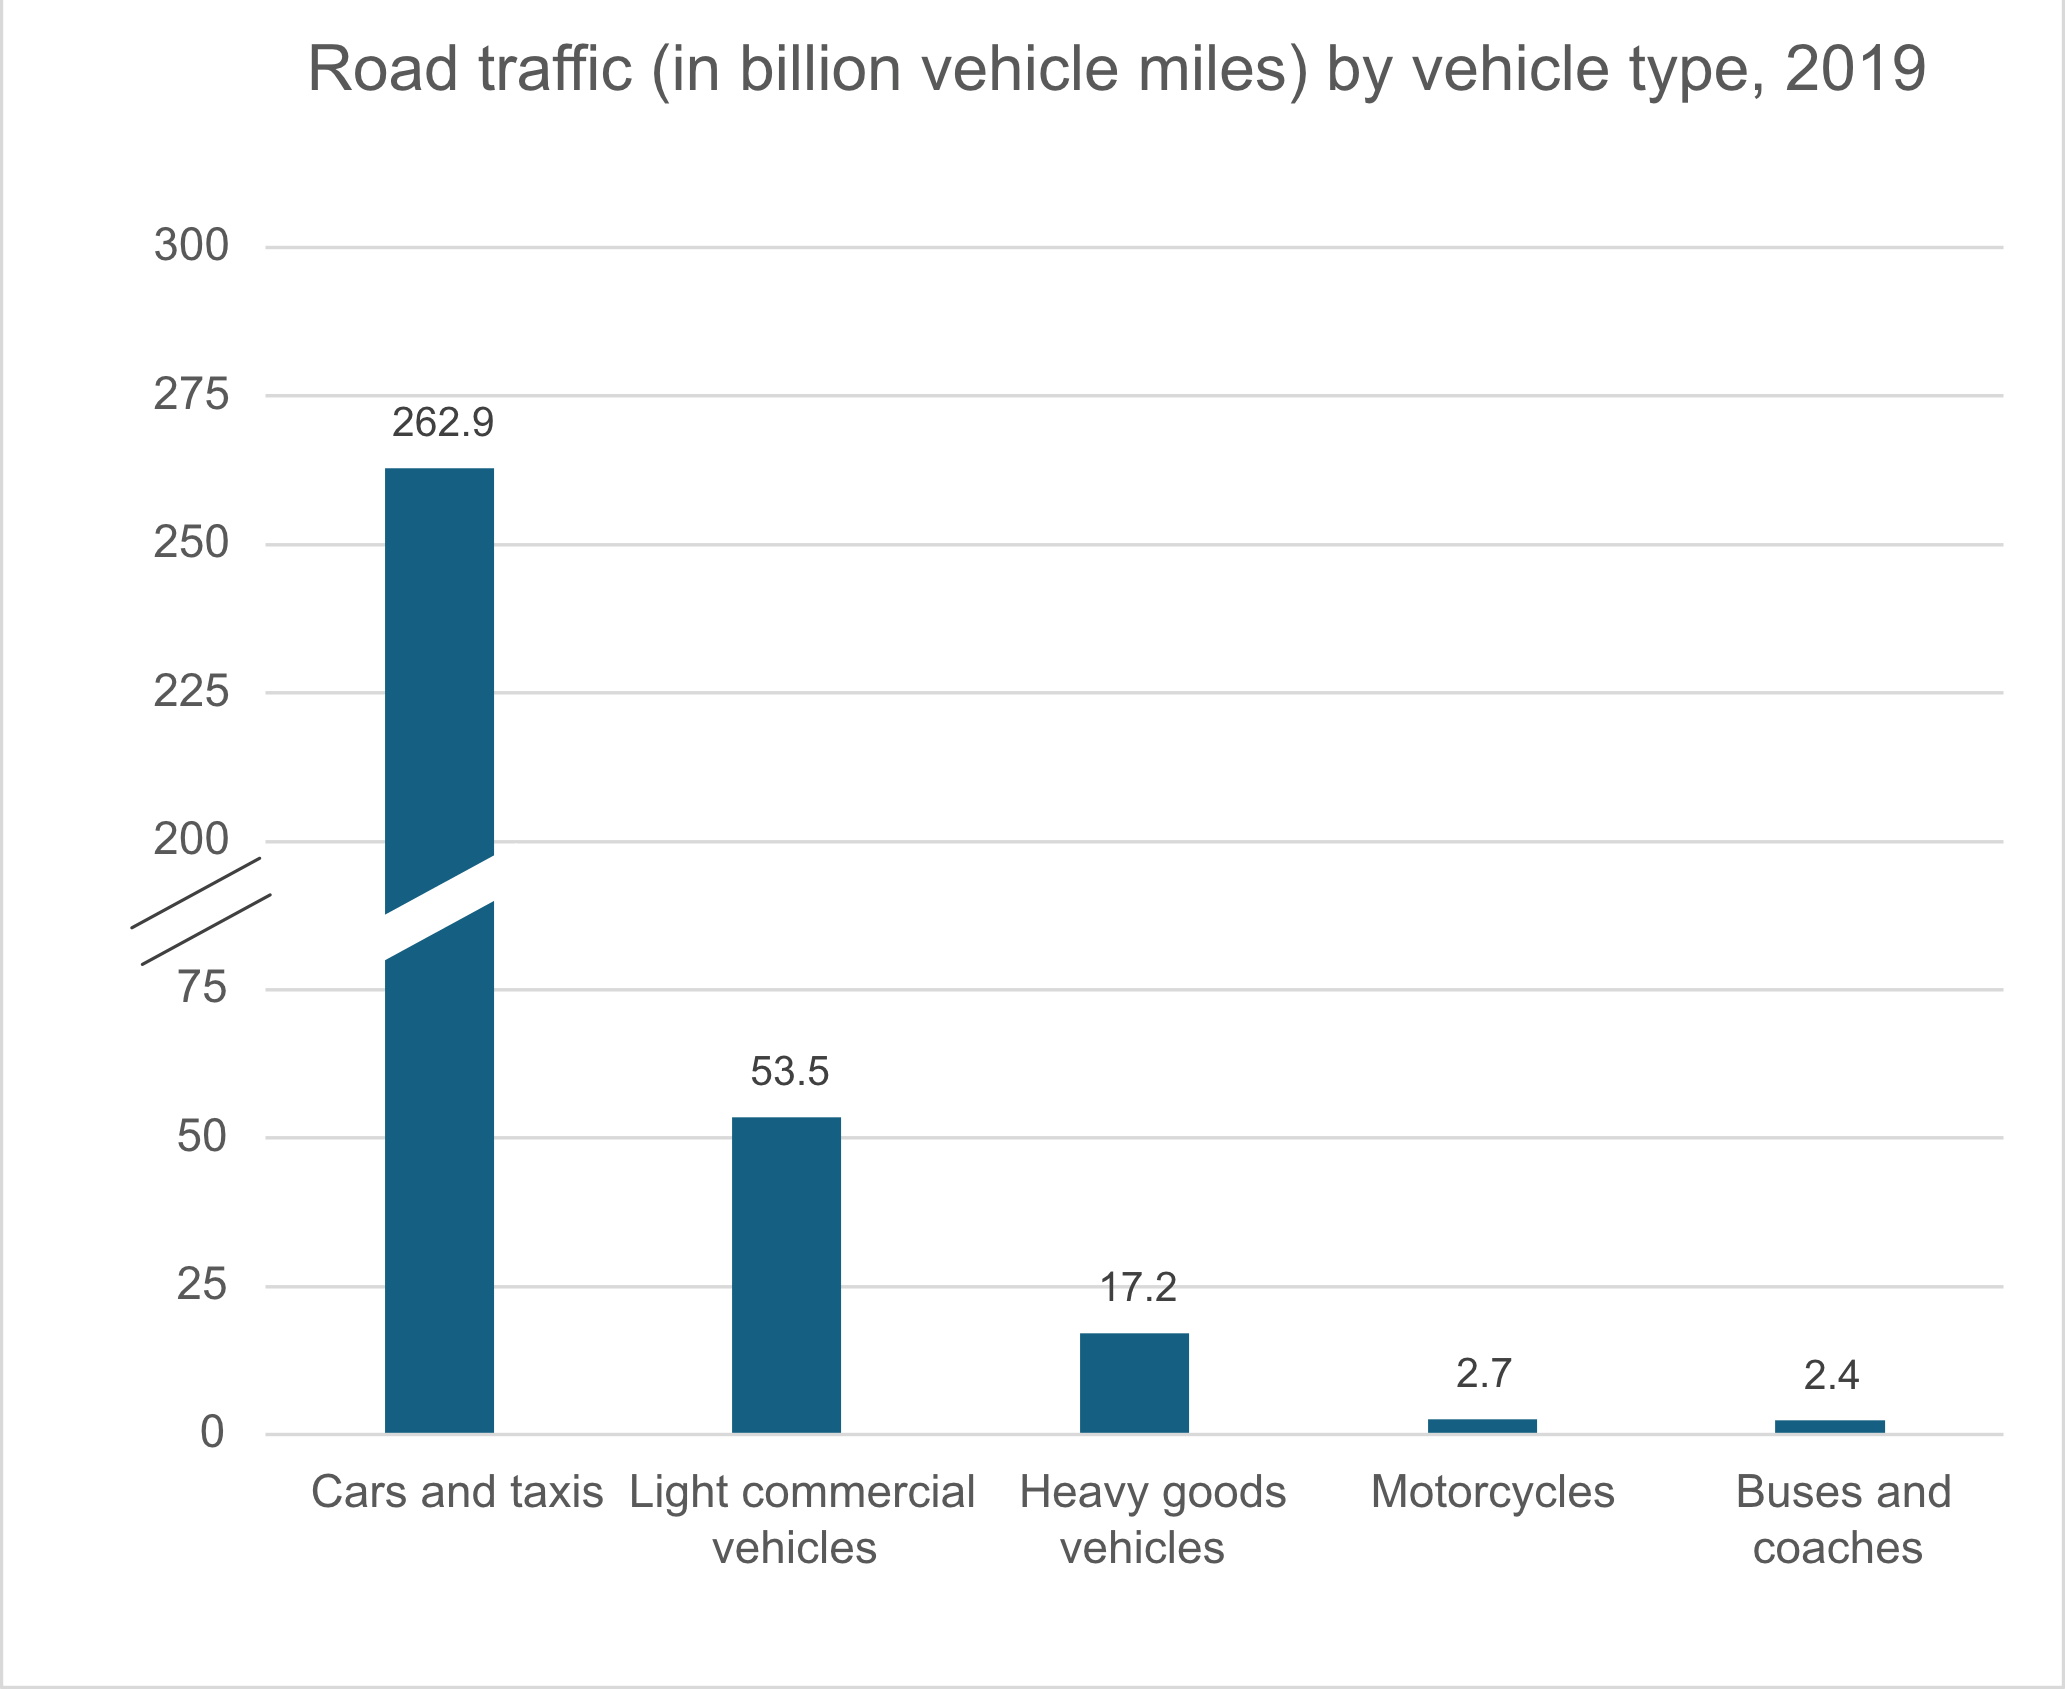 Road traffic by vehicle type